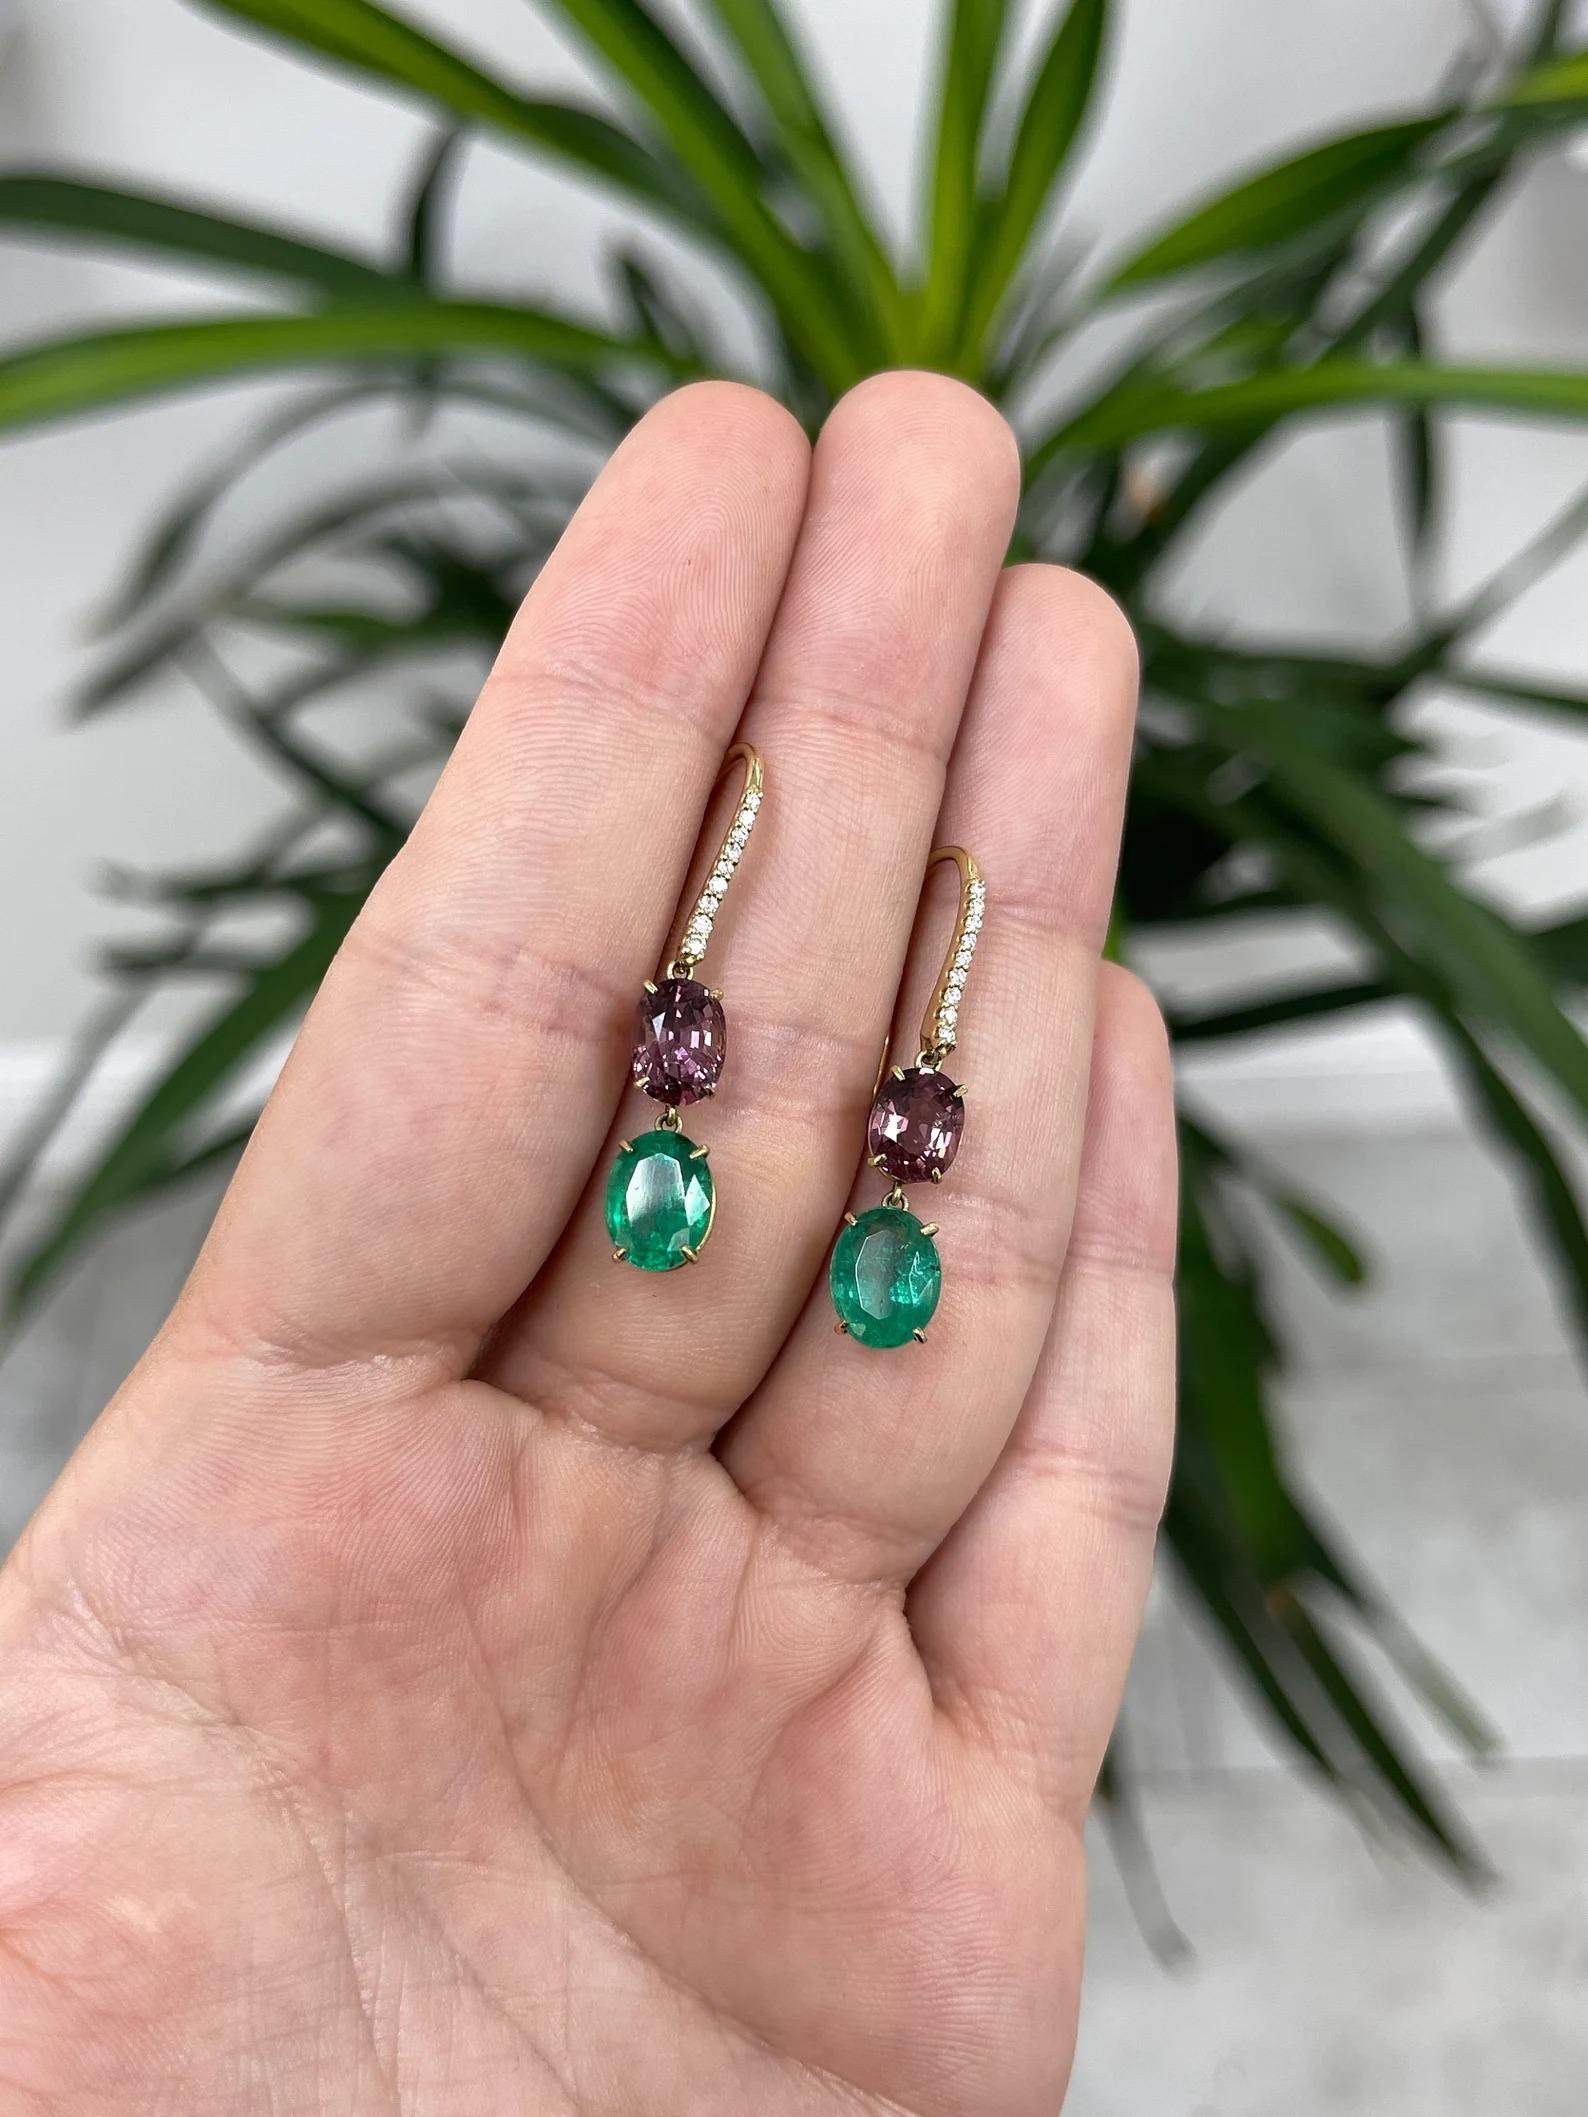 Oval Cut 6.68tcw Vivid Green Emerald, Spinel, & Pave Diamond Accent Dangle Earrings 18K For Sale